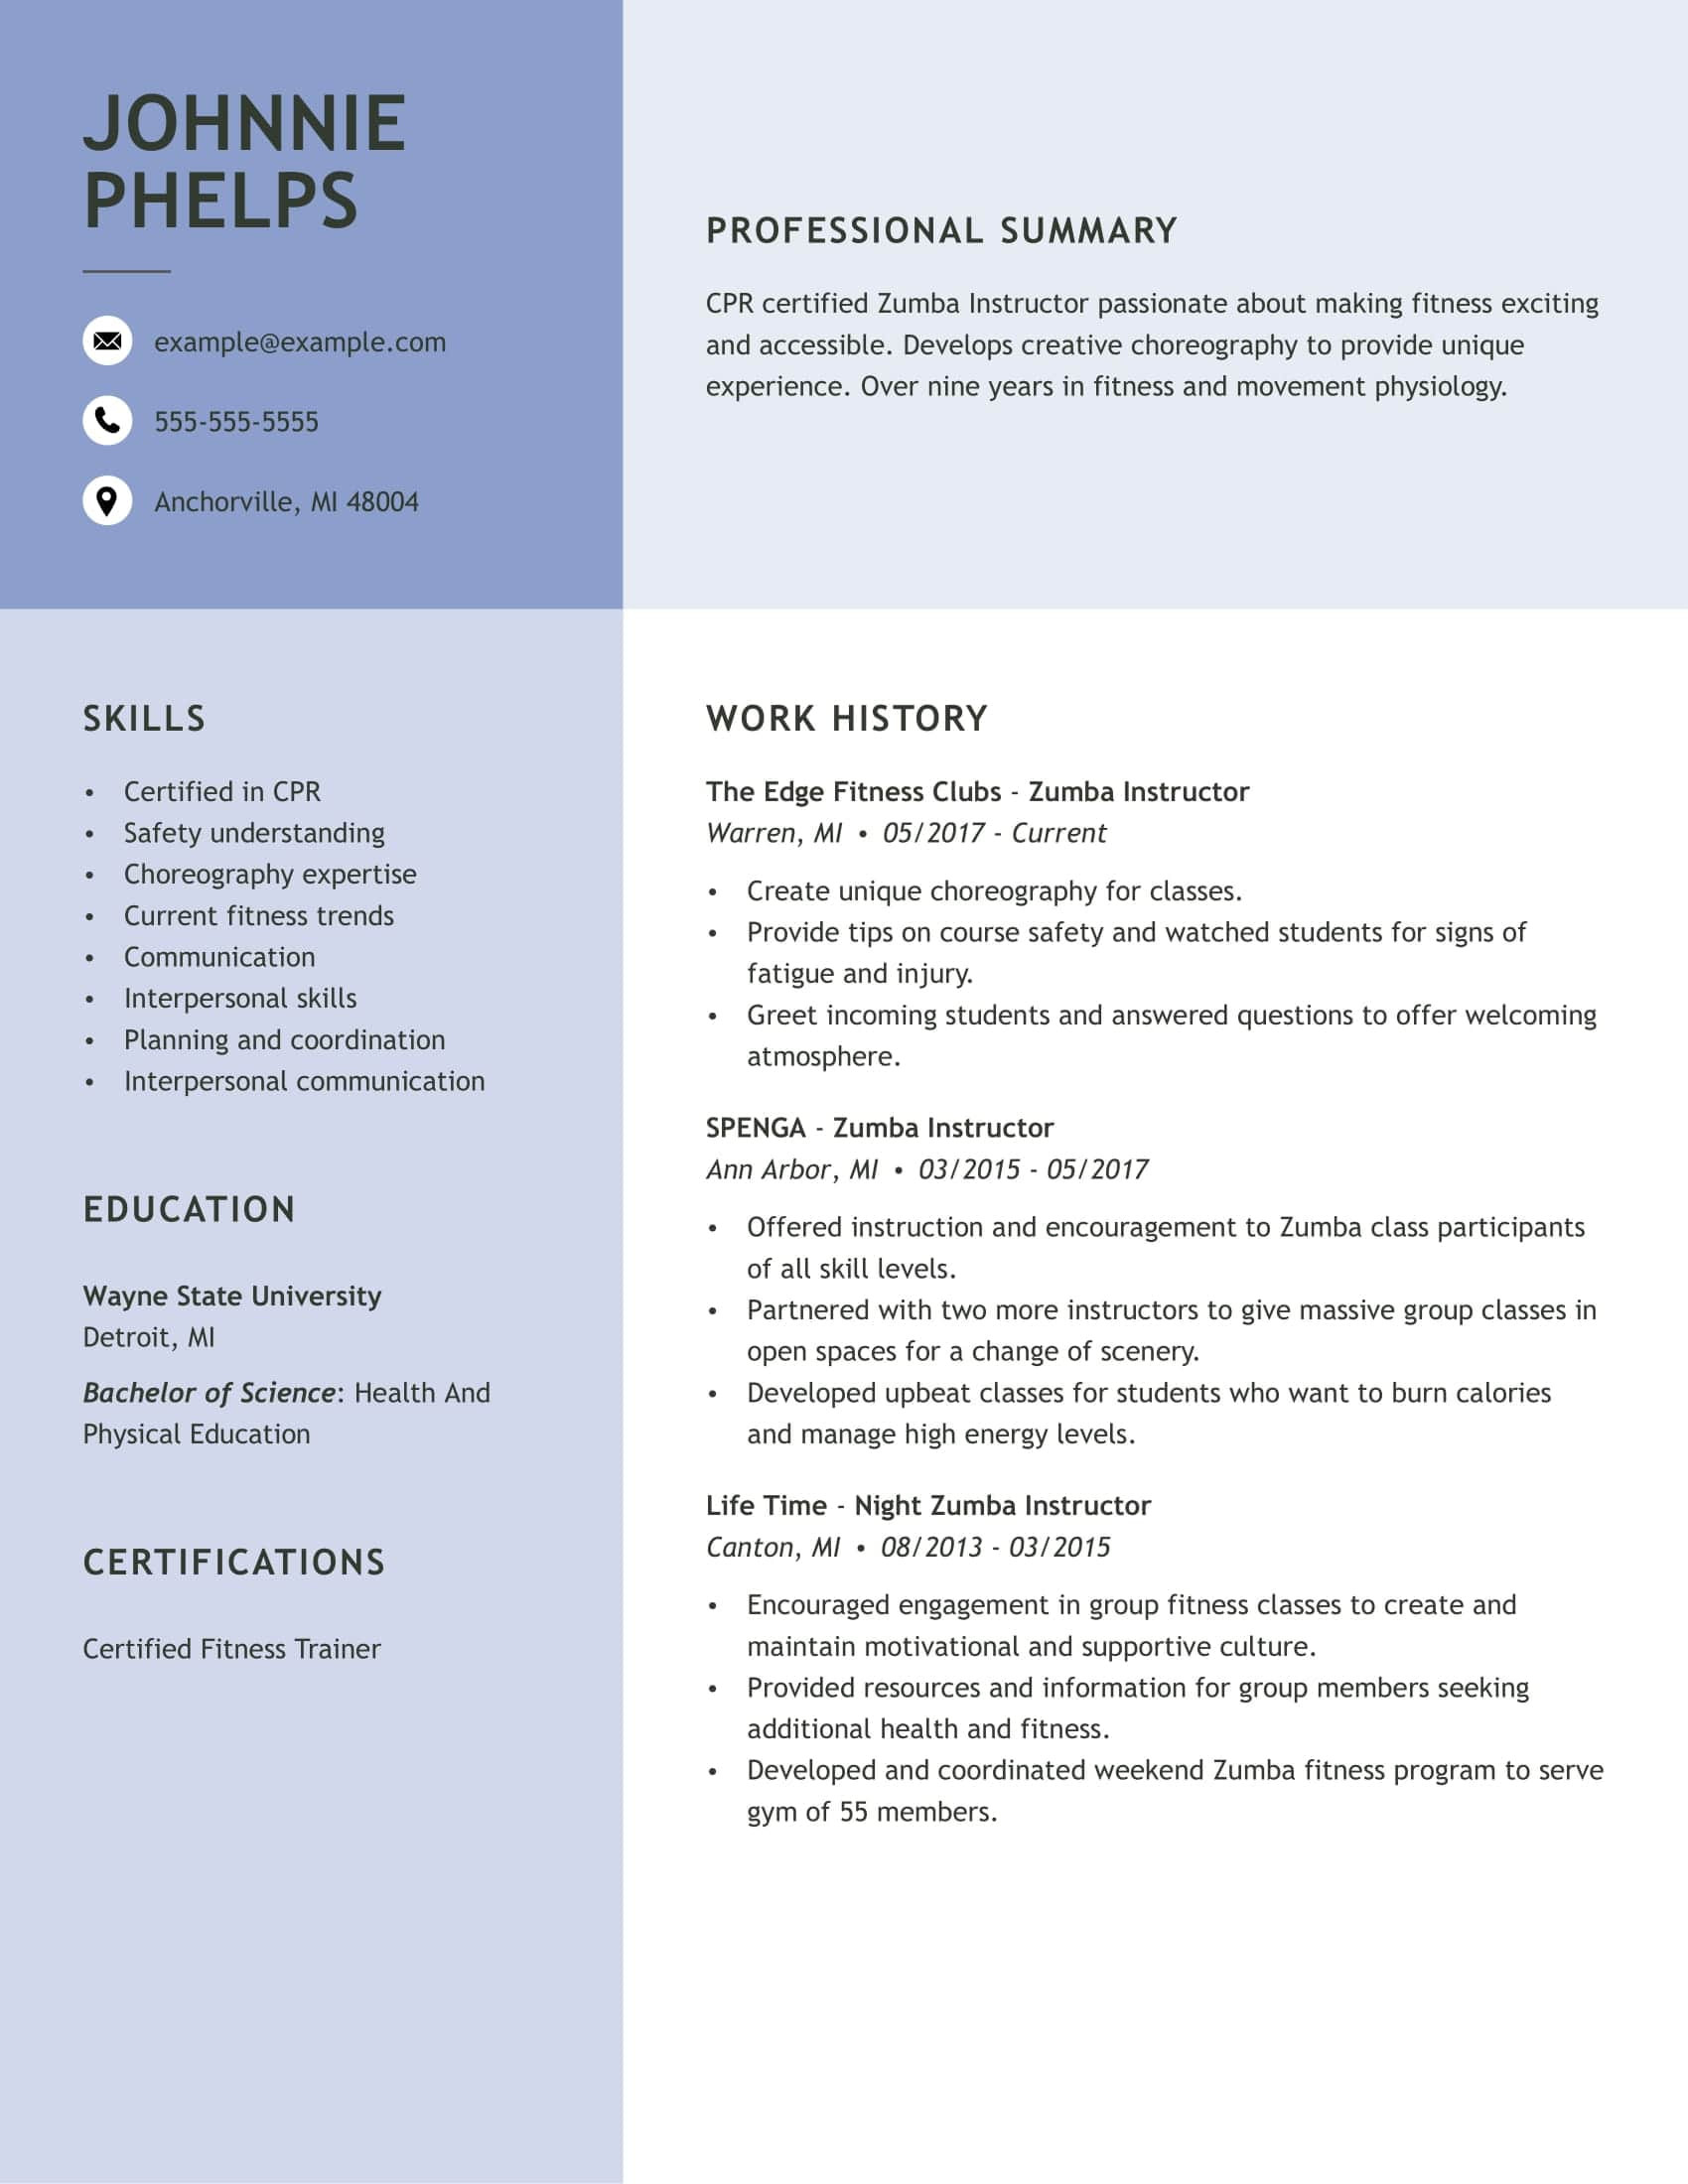 Sample Resume for New Zumba Instructor Zumba Instructor Free Resume Templates   How-to Guide